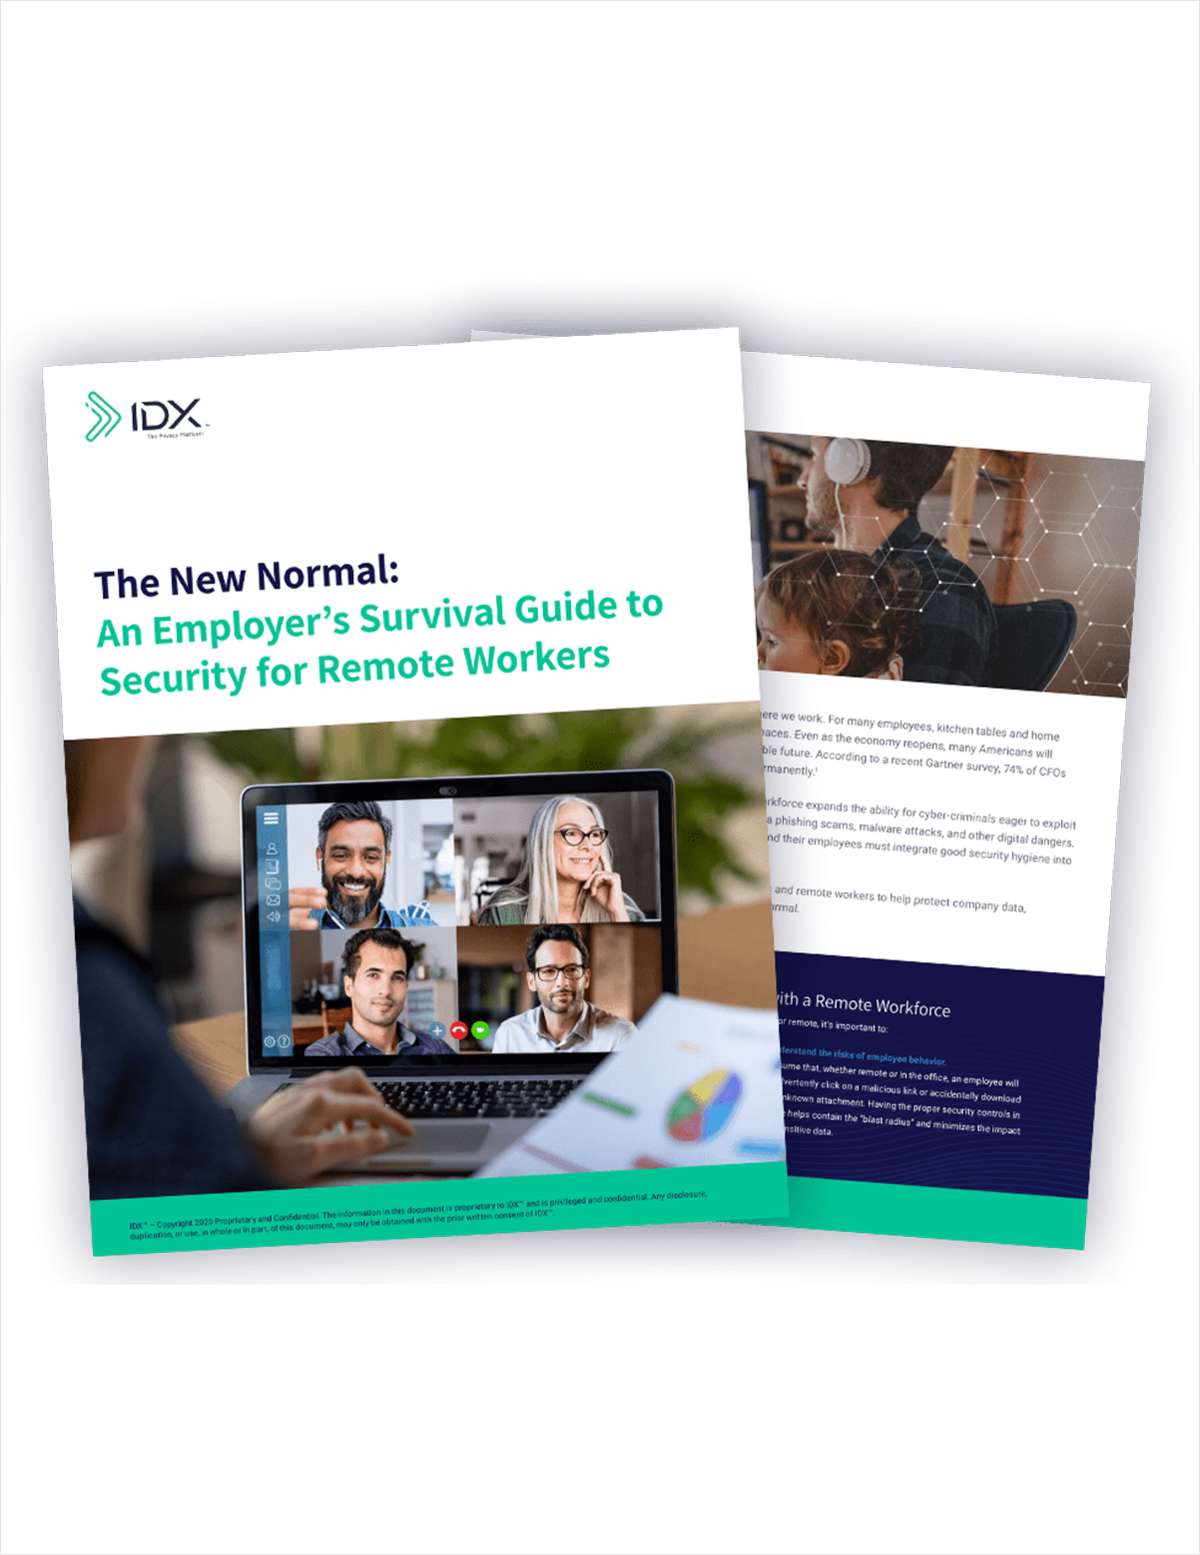 The New Normal: An Employer's Survival Guide to Security for Remote Workers